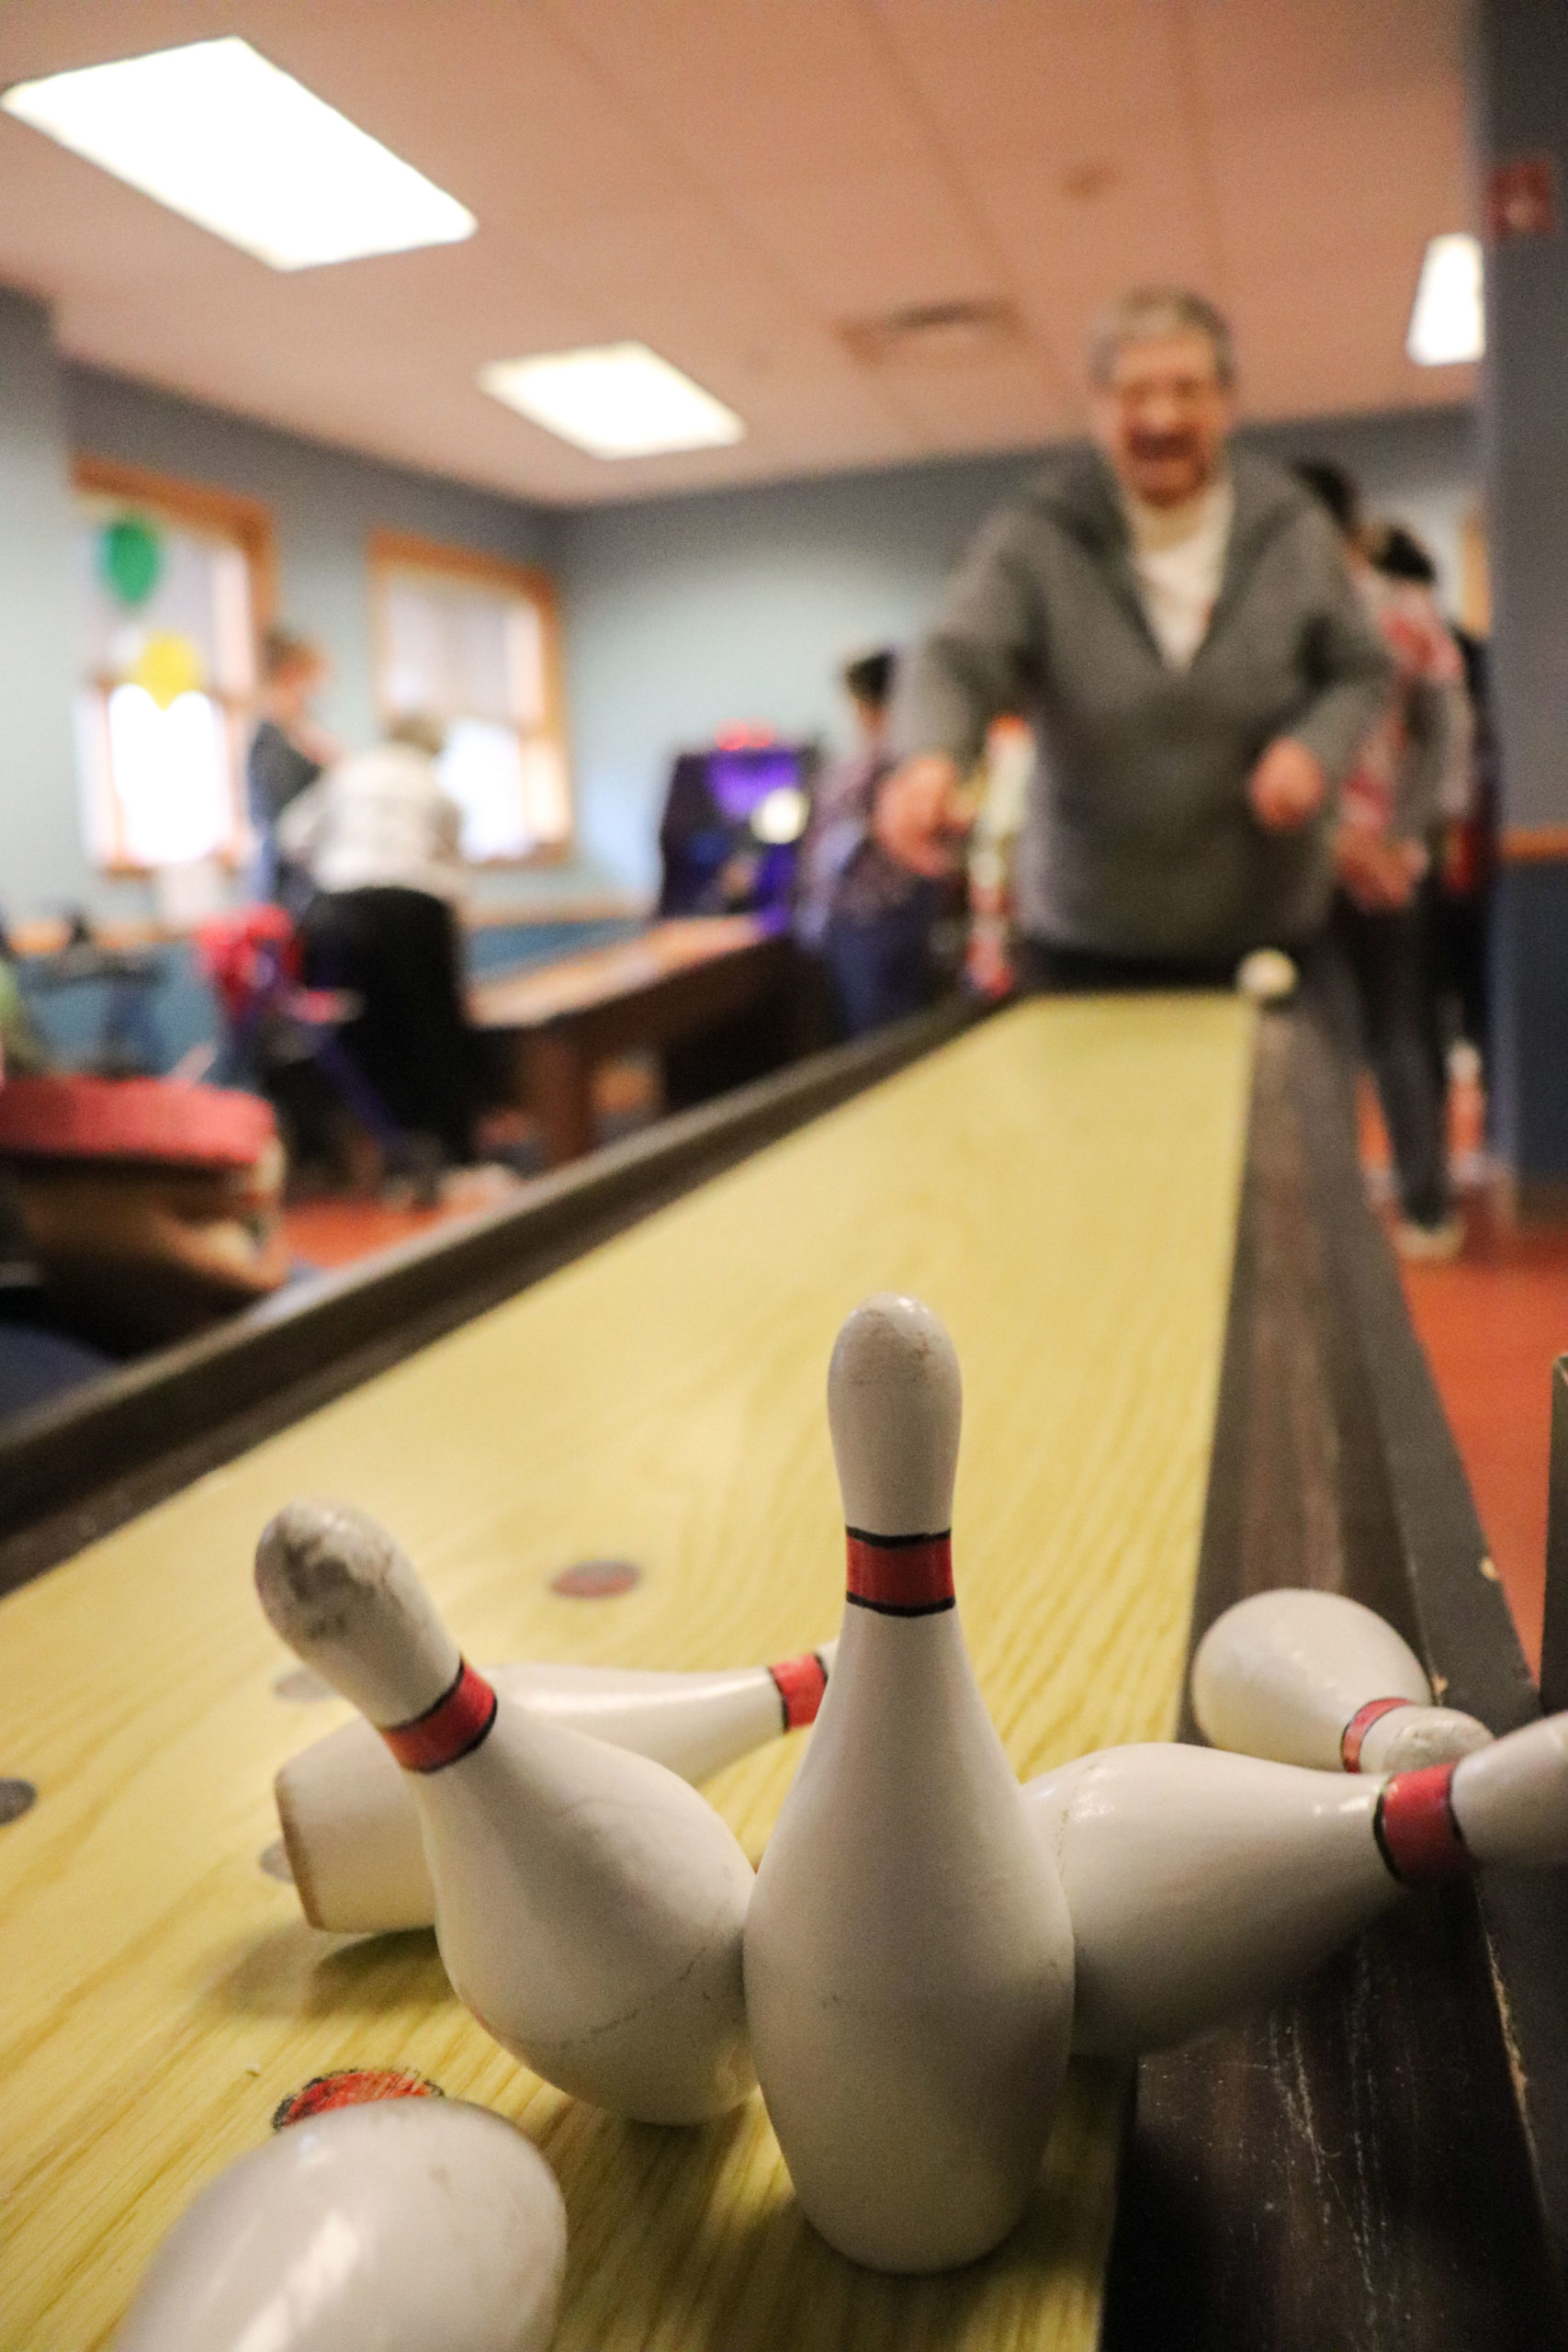 Image of falling bowling pins and unknown man, shot take Masonic Care Community Bowling center on 2nd floor